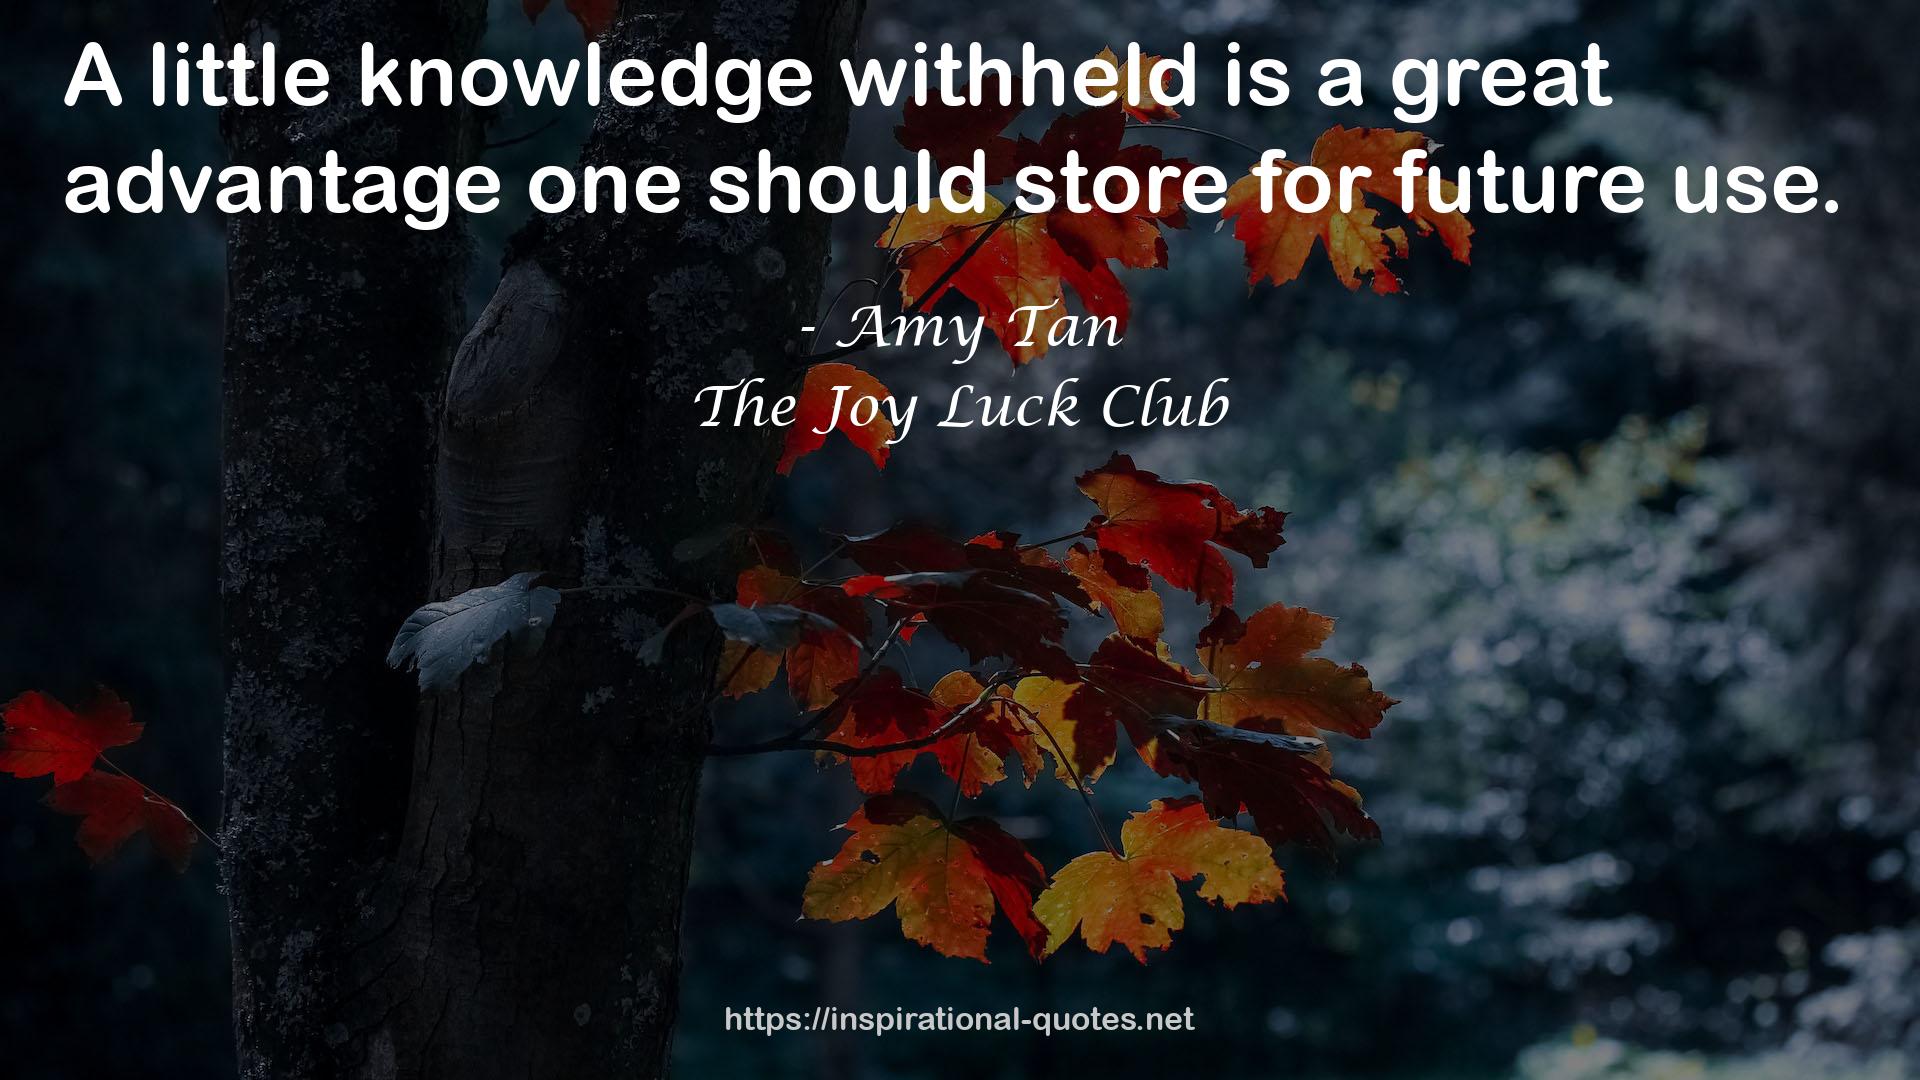 The Joy Luck Club QUOTES